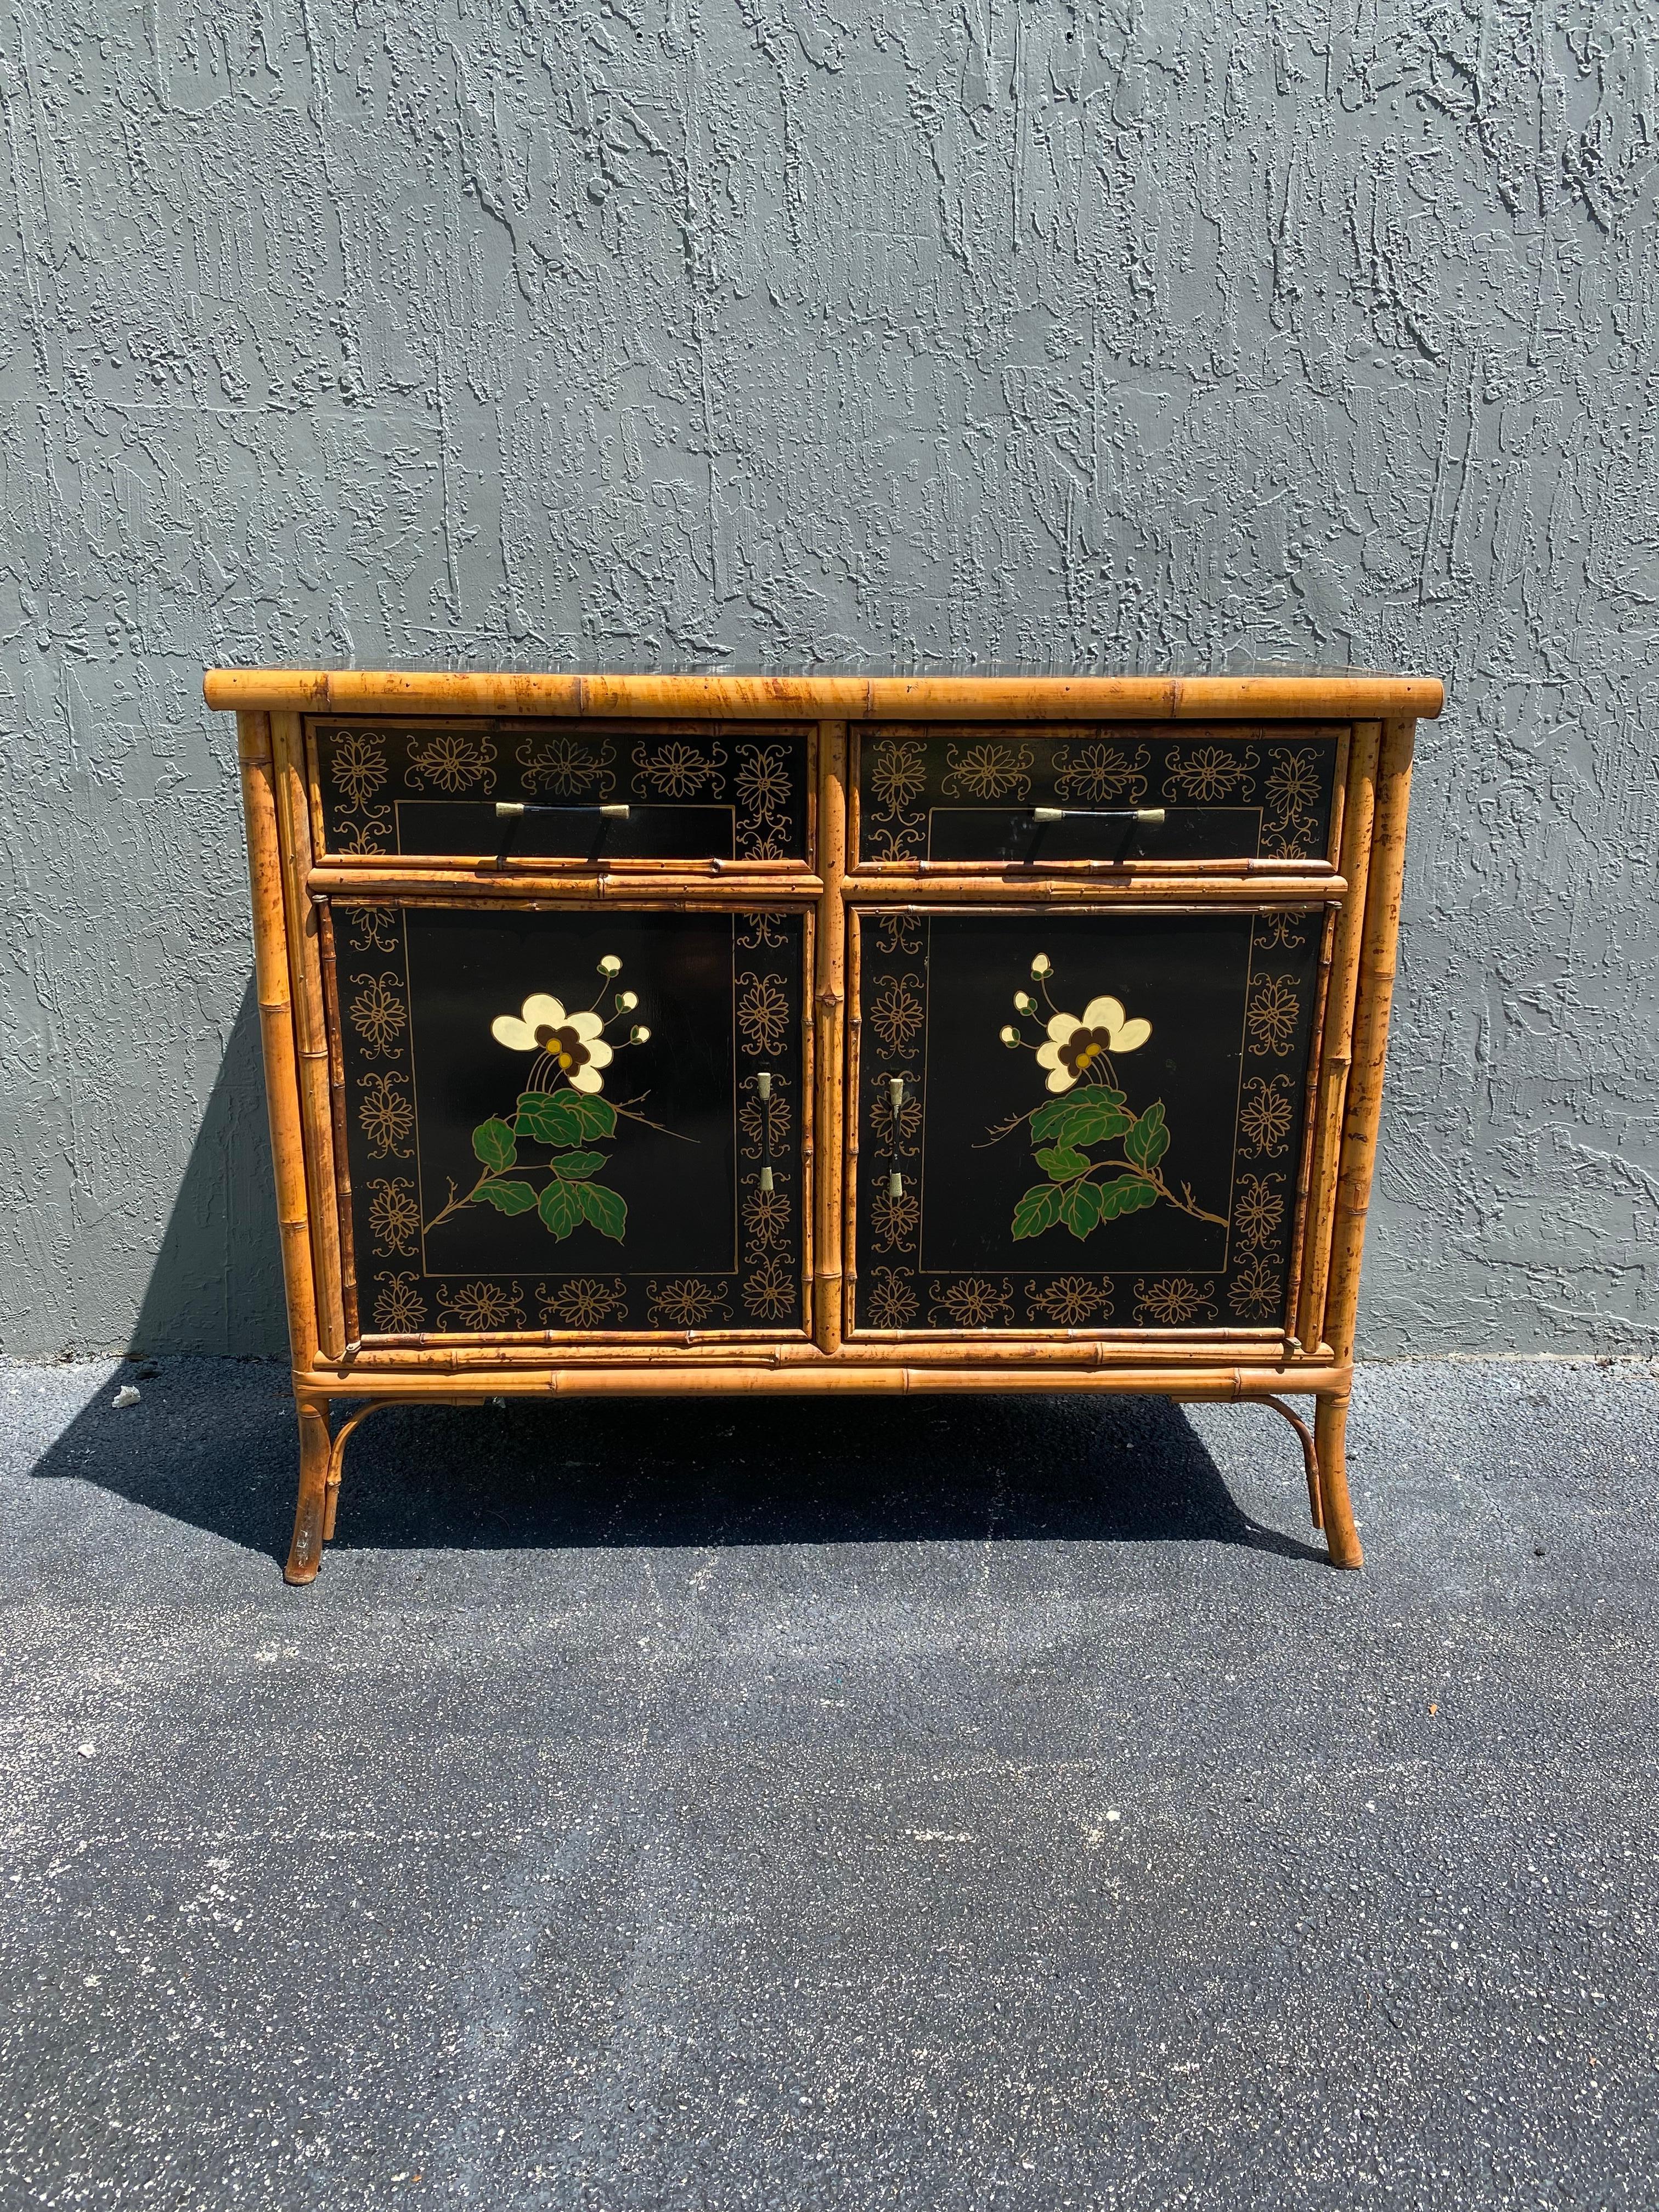 On offer on this occasion is one of the most stunning, cabinet you could hope to find. This is an ultra-rare opportunity to acquire what is, unequivocally, the best of the best, it being a most spectacular and beautifully-presented hand painted